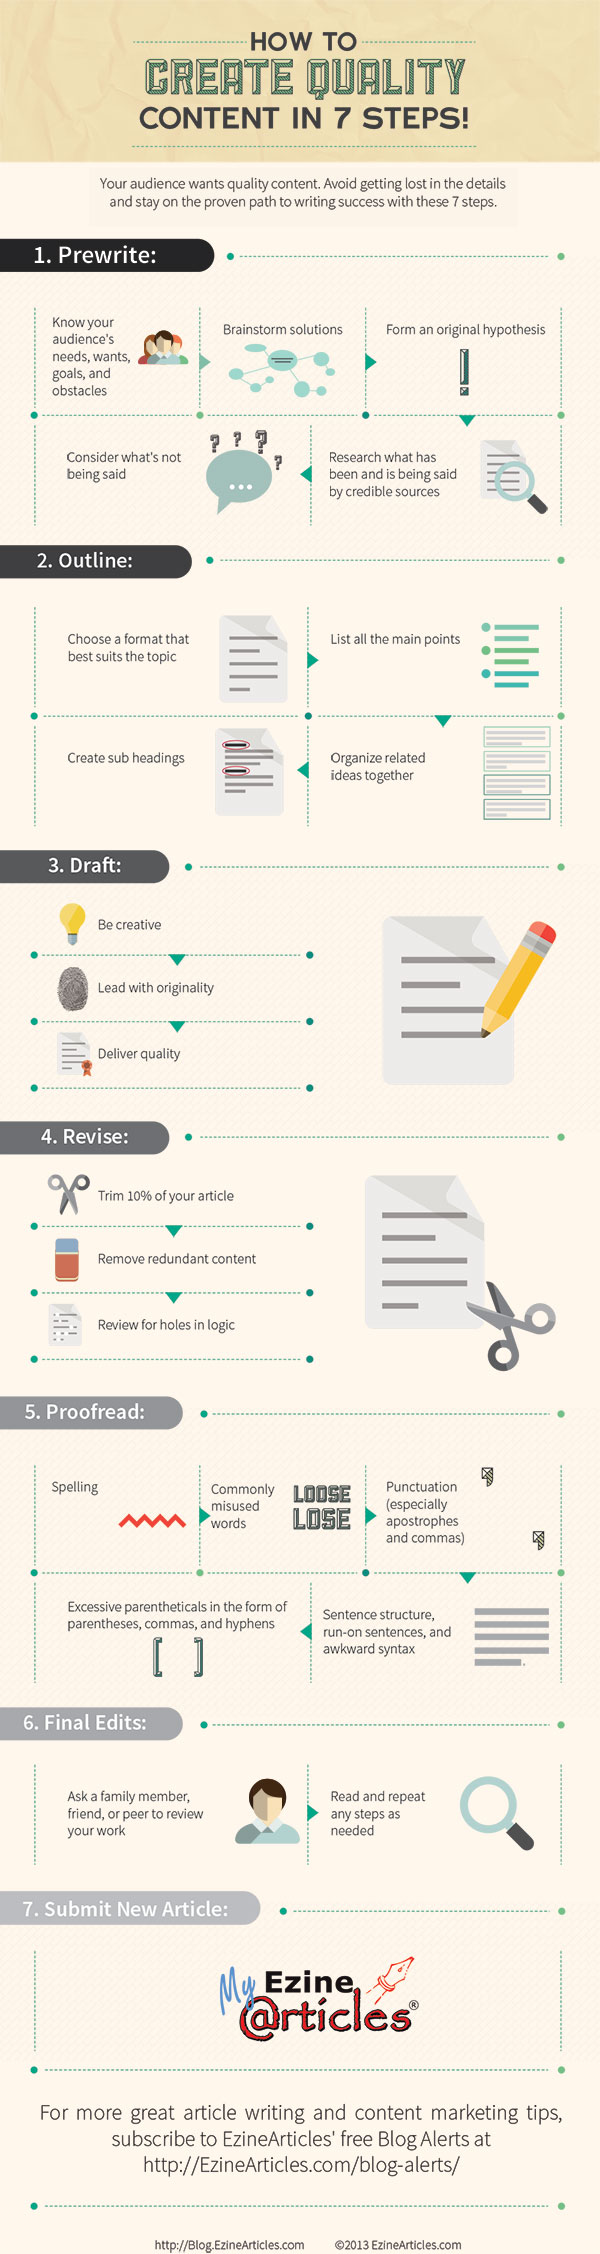 Infographic - content marketing